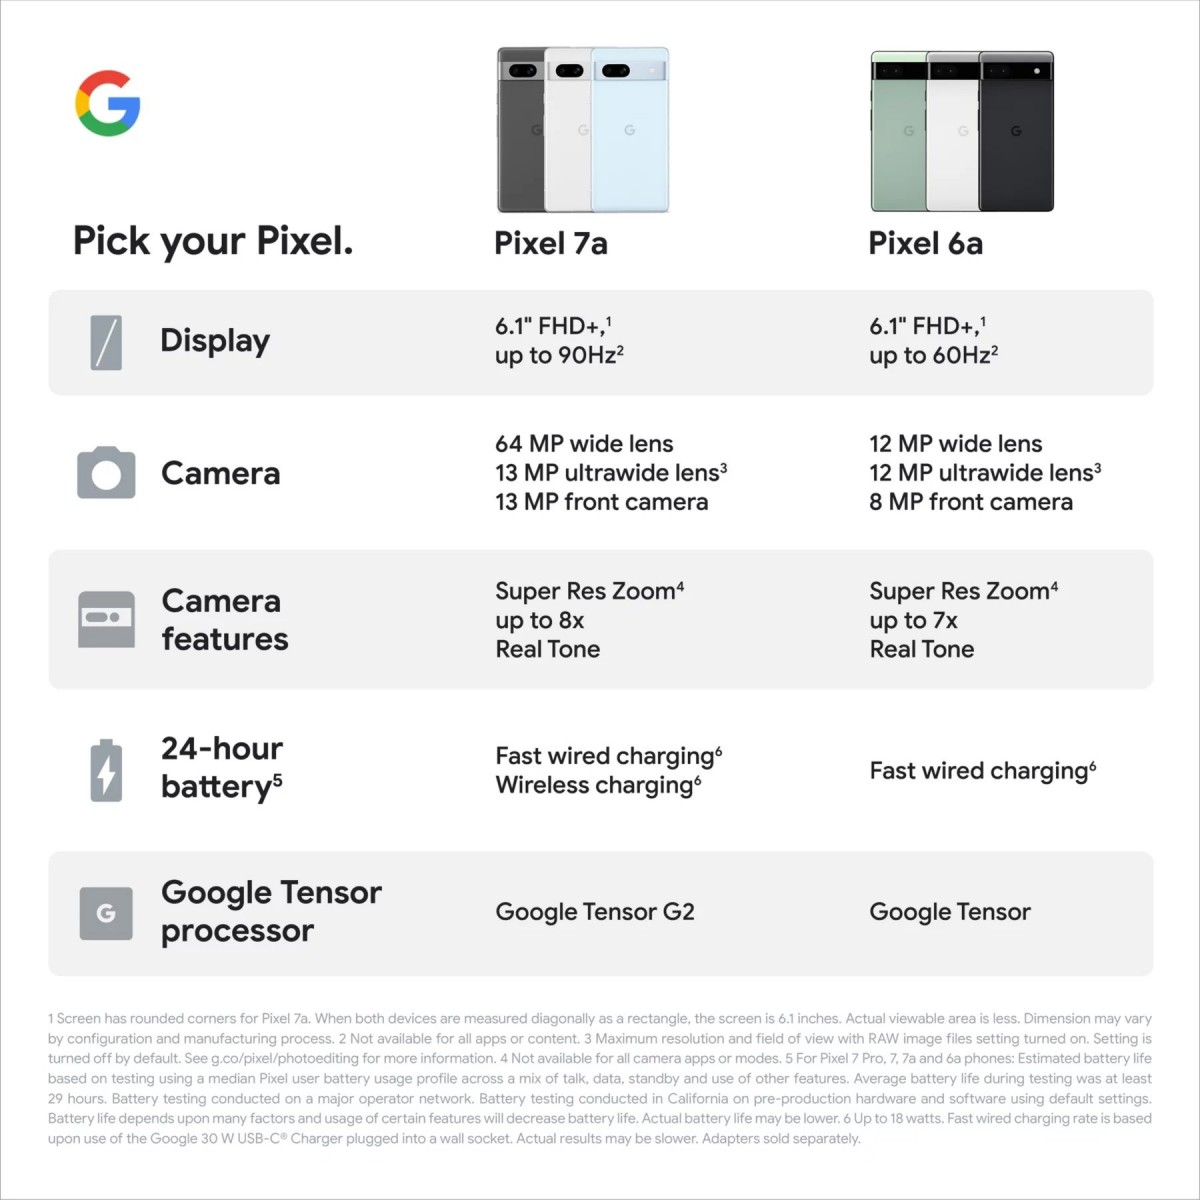 Google Pixel 7a - Price in India, Specifications, Comparison (29th